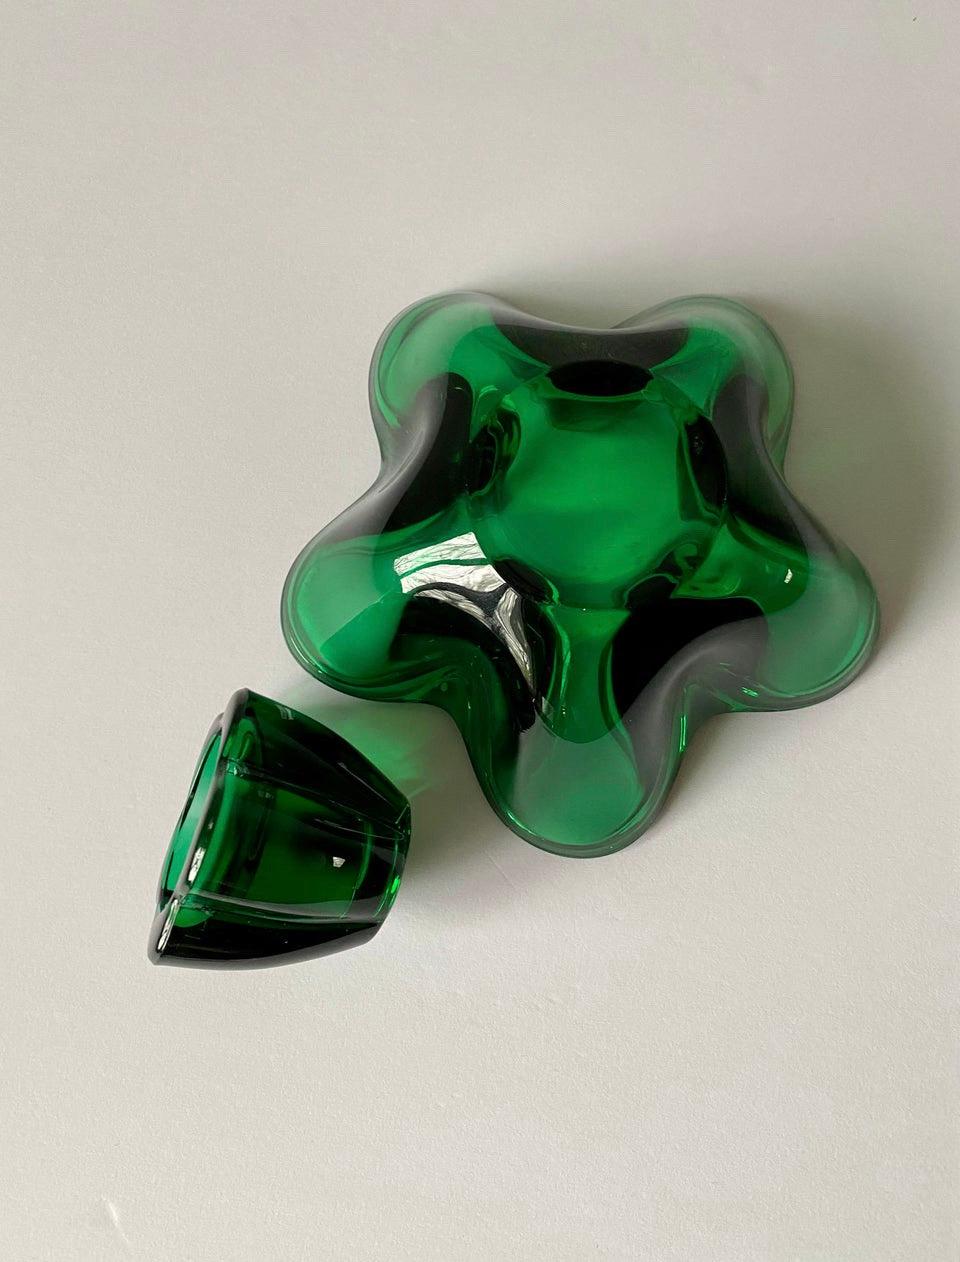 One of kind ! This rare vintage Ashtray shaped like a flower had a  personal removable mini ashtray in the middle 
Color is a deep rich green makes a perfect catch-all bowl !